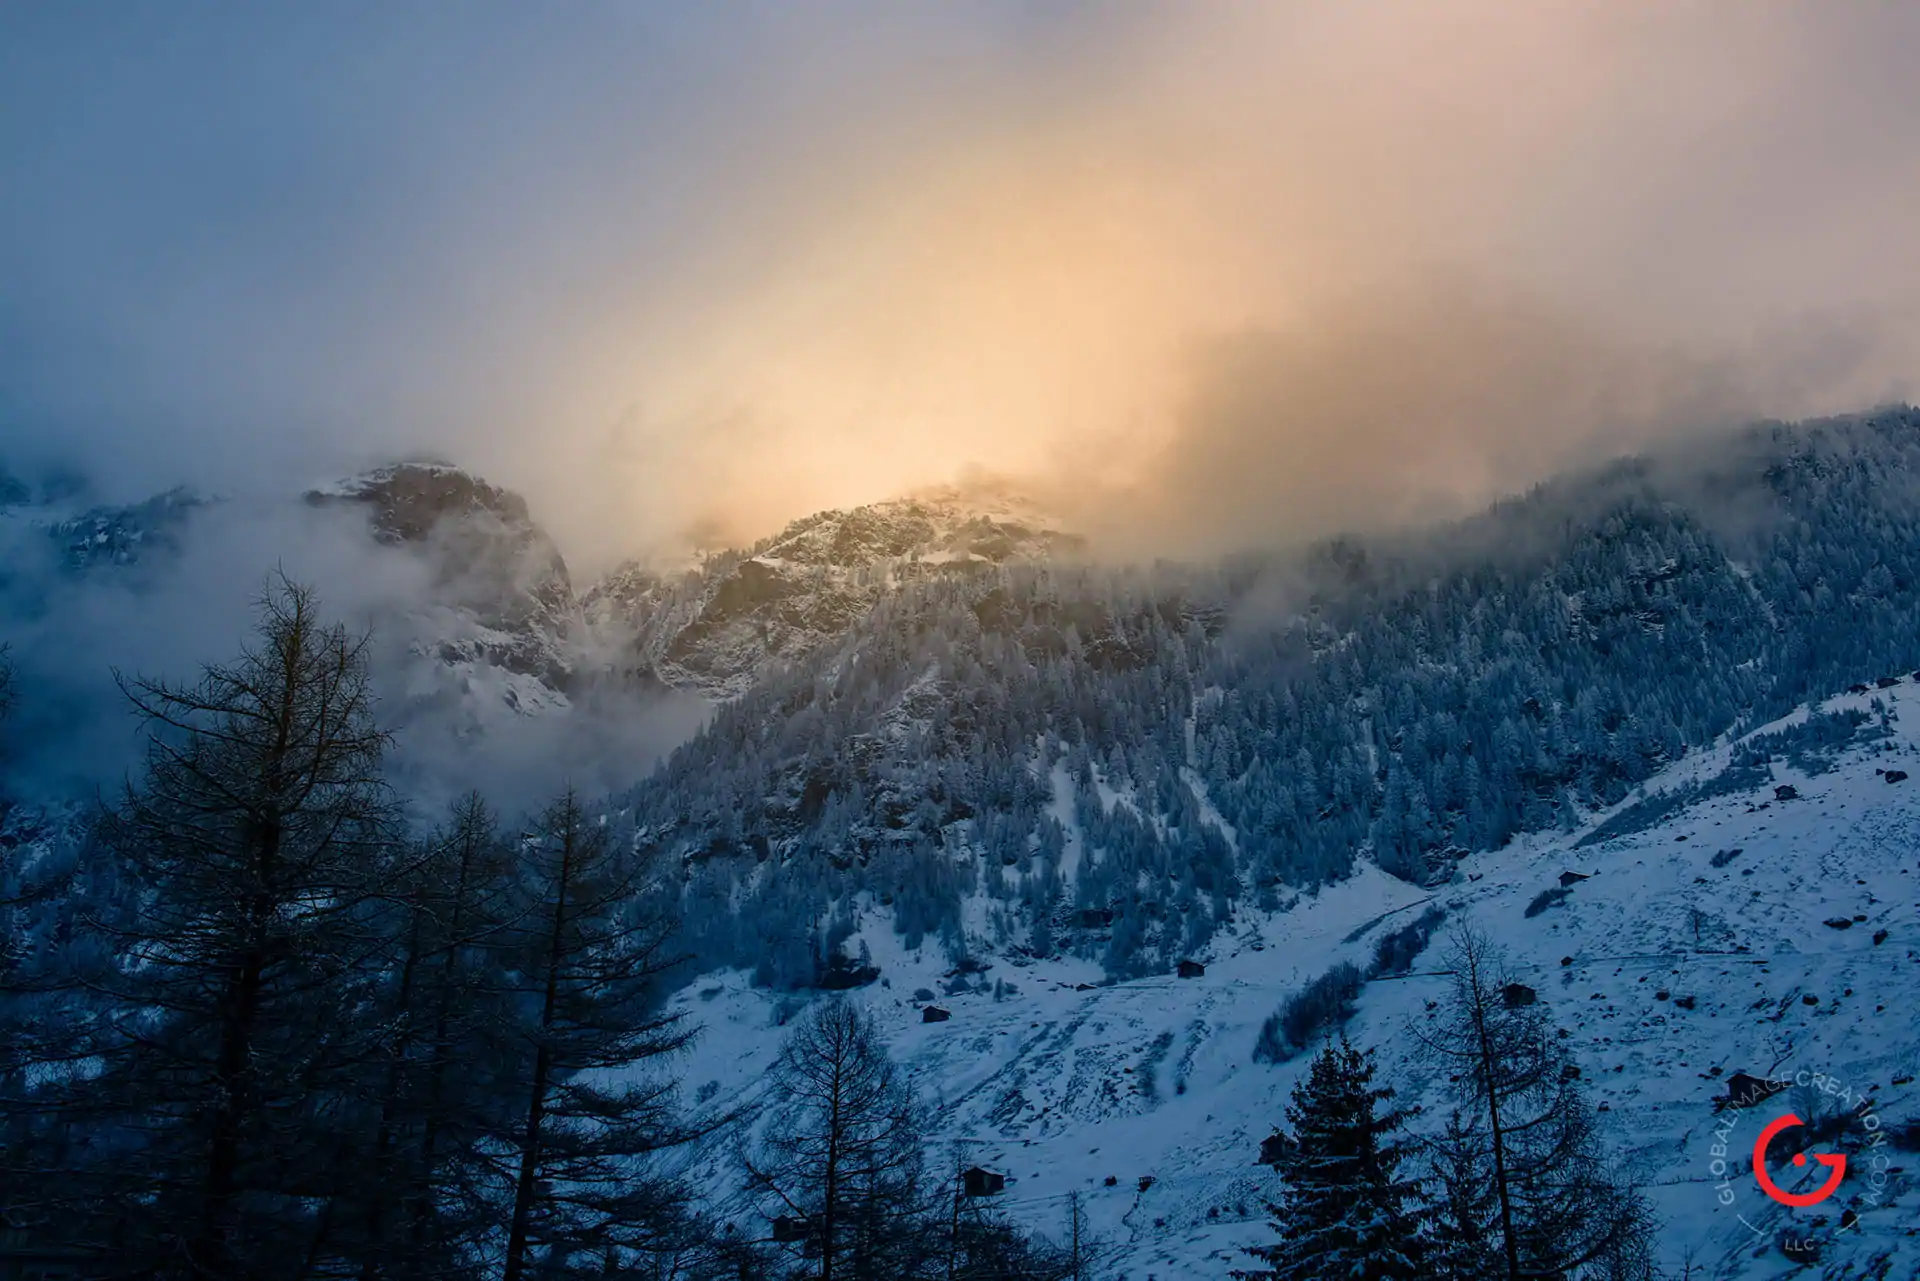 Swiss Mountain Landscape in the Snow - Travel Photographer